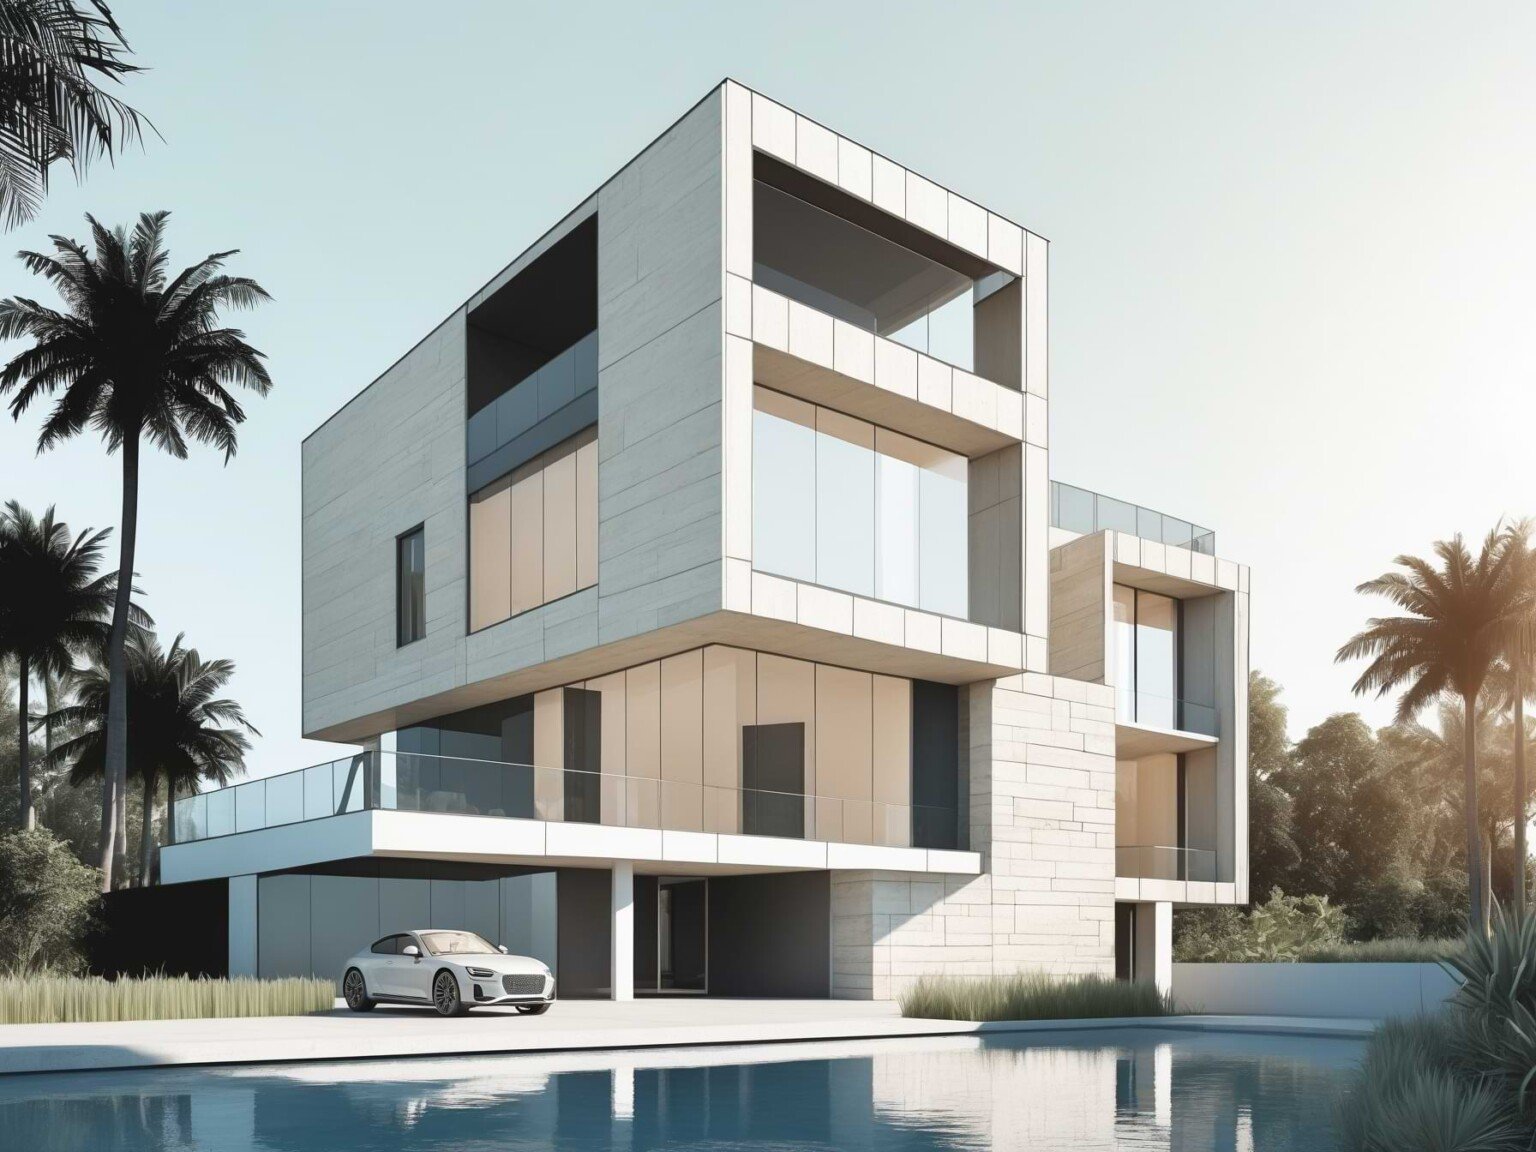 ai architecture designed luxury home with modern aesthetics